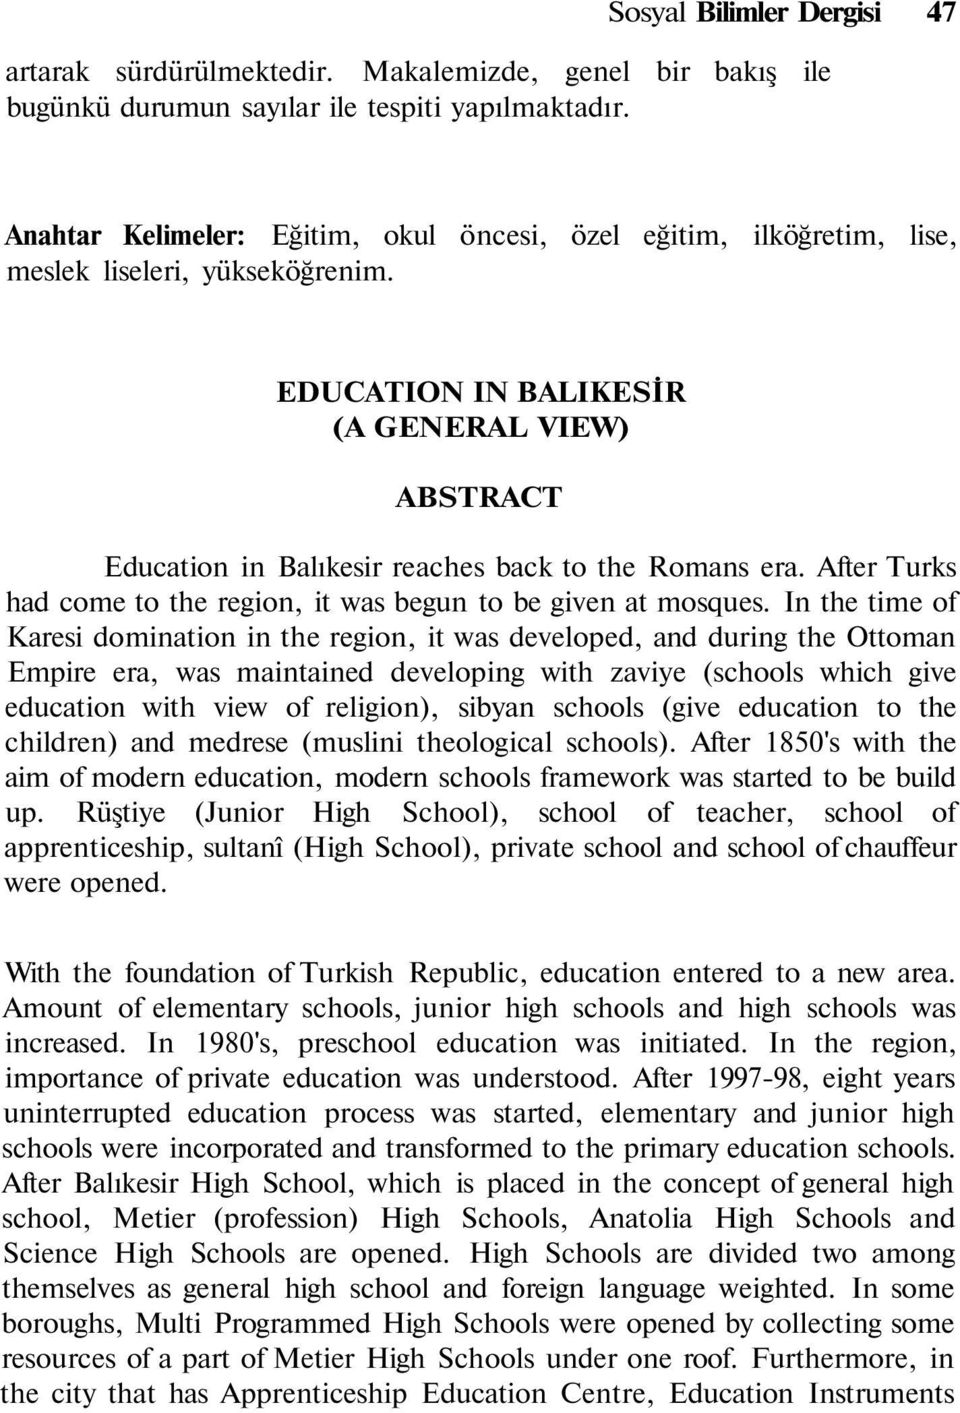 EDUCATION IN BALIKESİR (A GENERAL VIEW) ABSTRACT Education in Balıkesir reaches back to the Romans era. After Turks had come to the region, it was begun to be given at mosques.